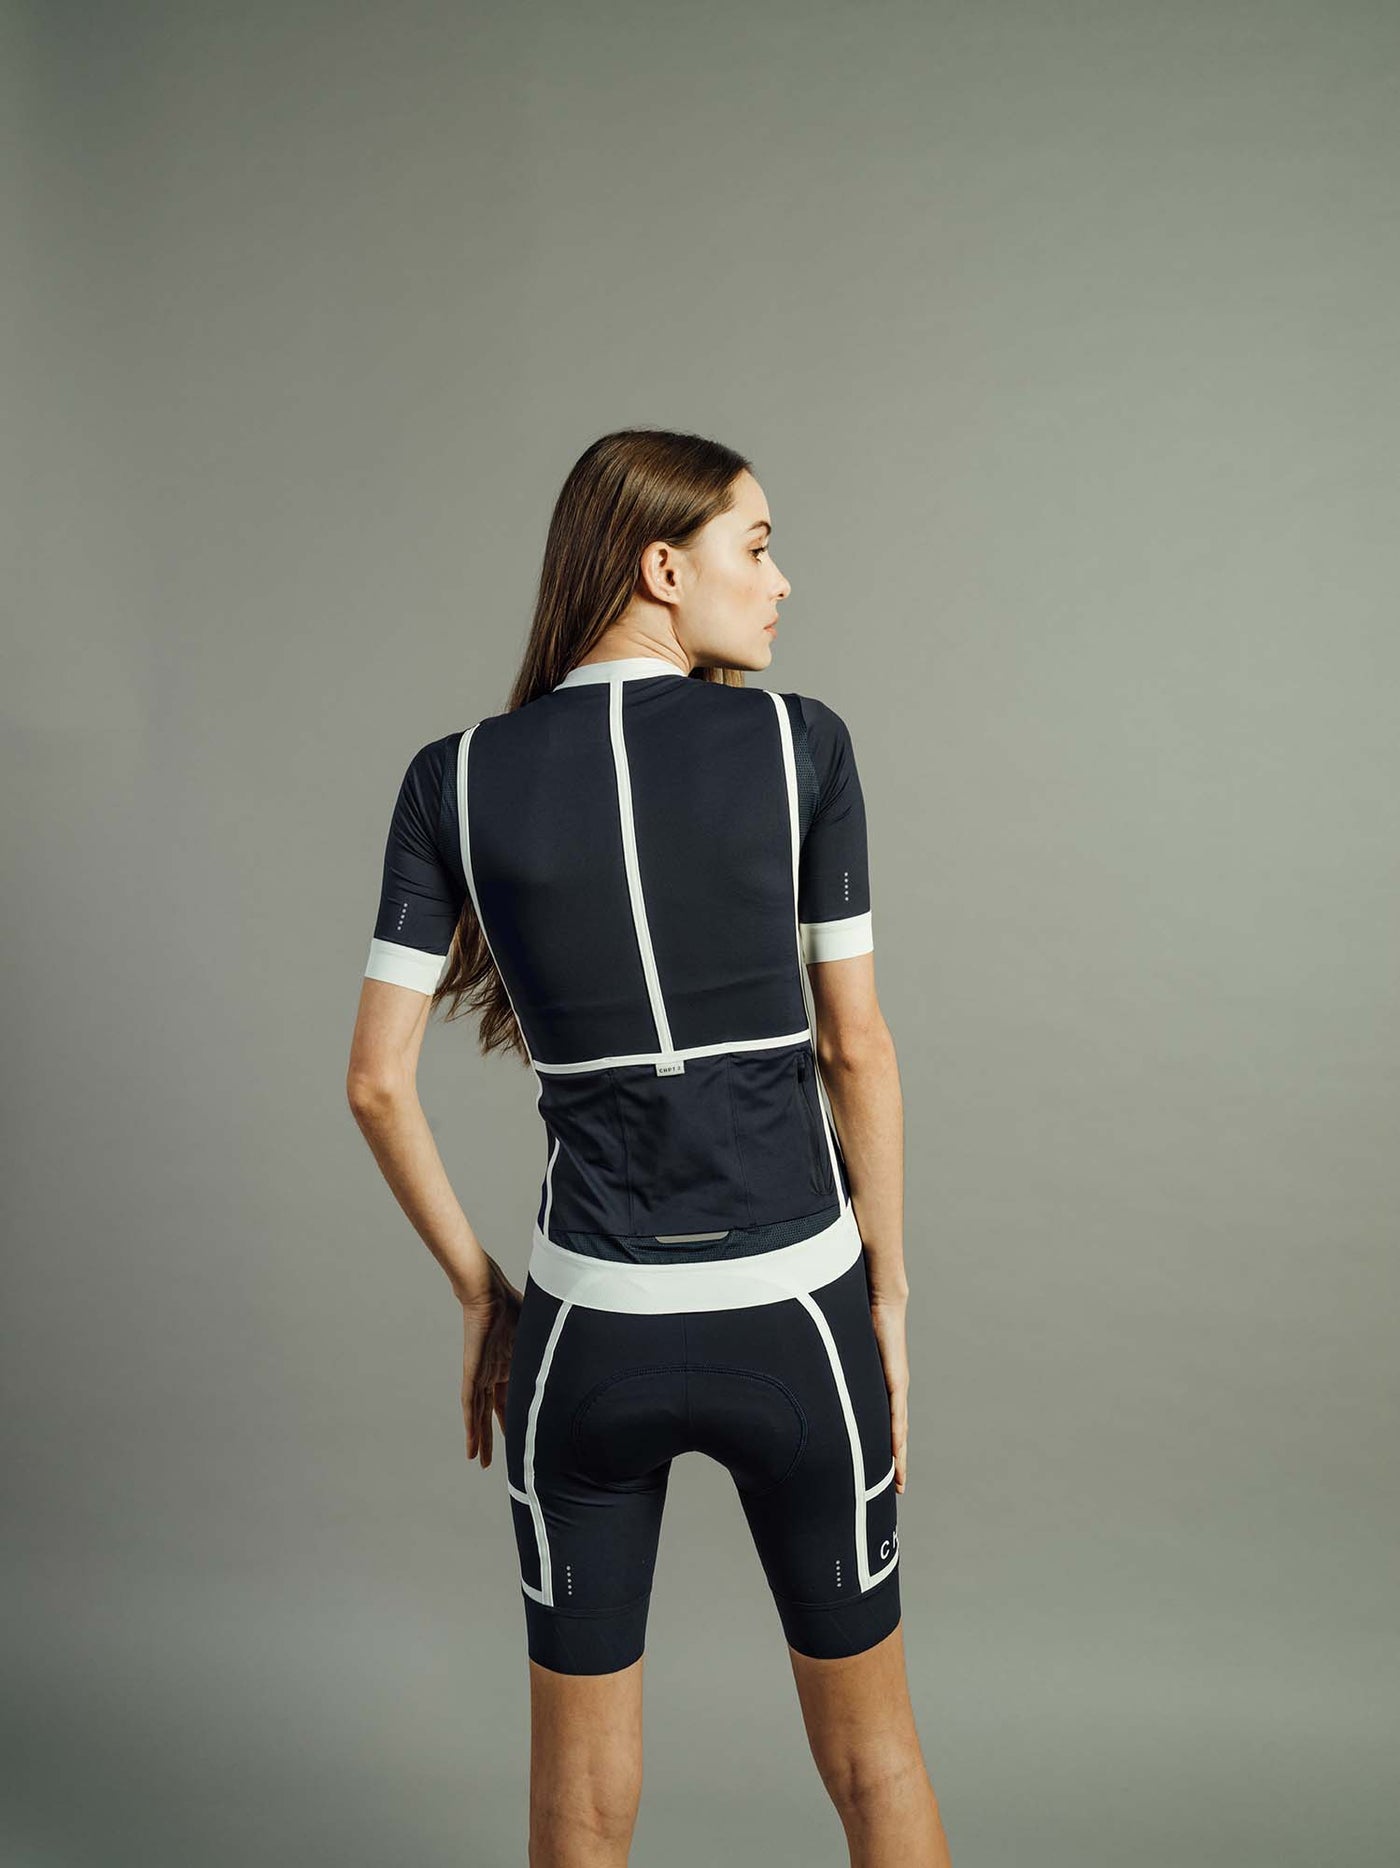 Reverse view of CHPT3 Biarritz Women's Cycling Jersey in Blue and White 